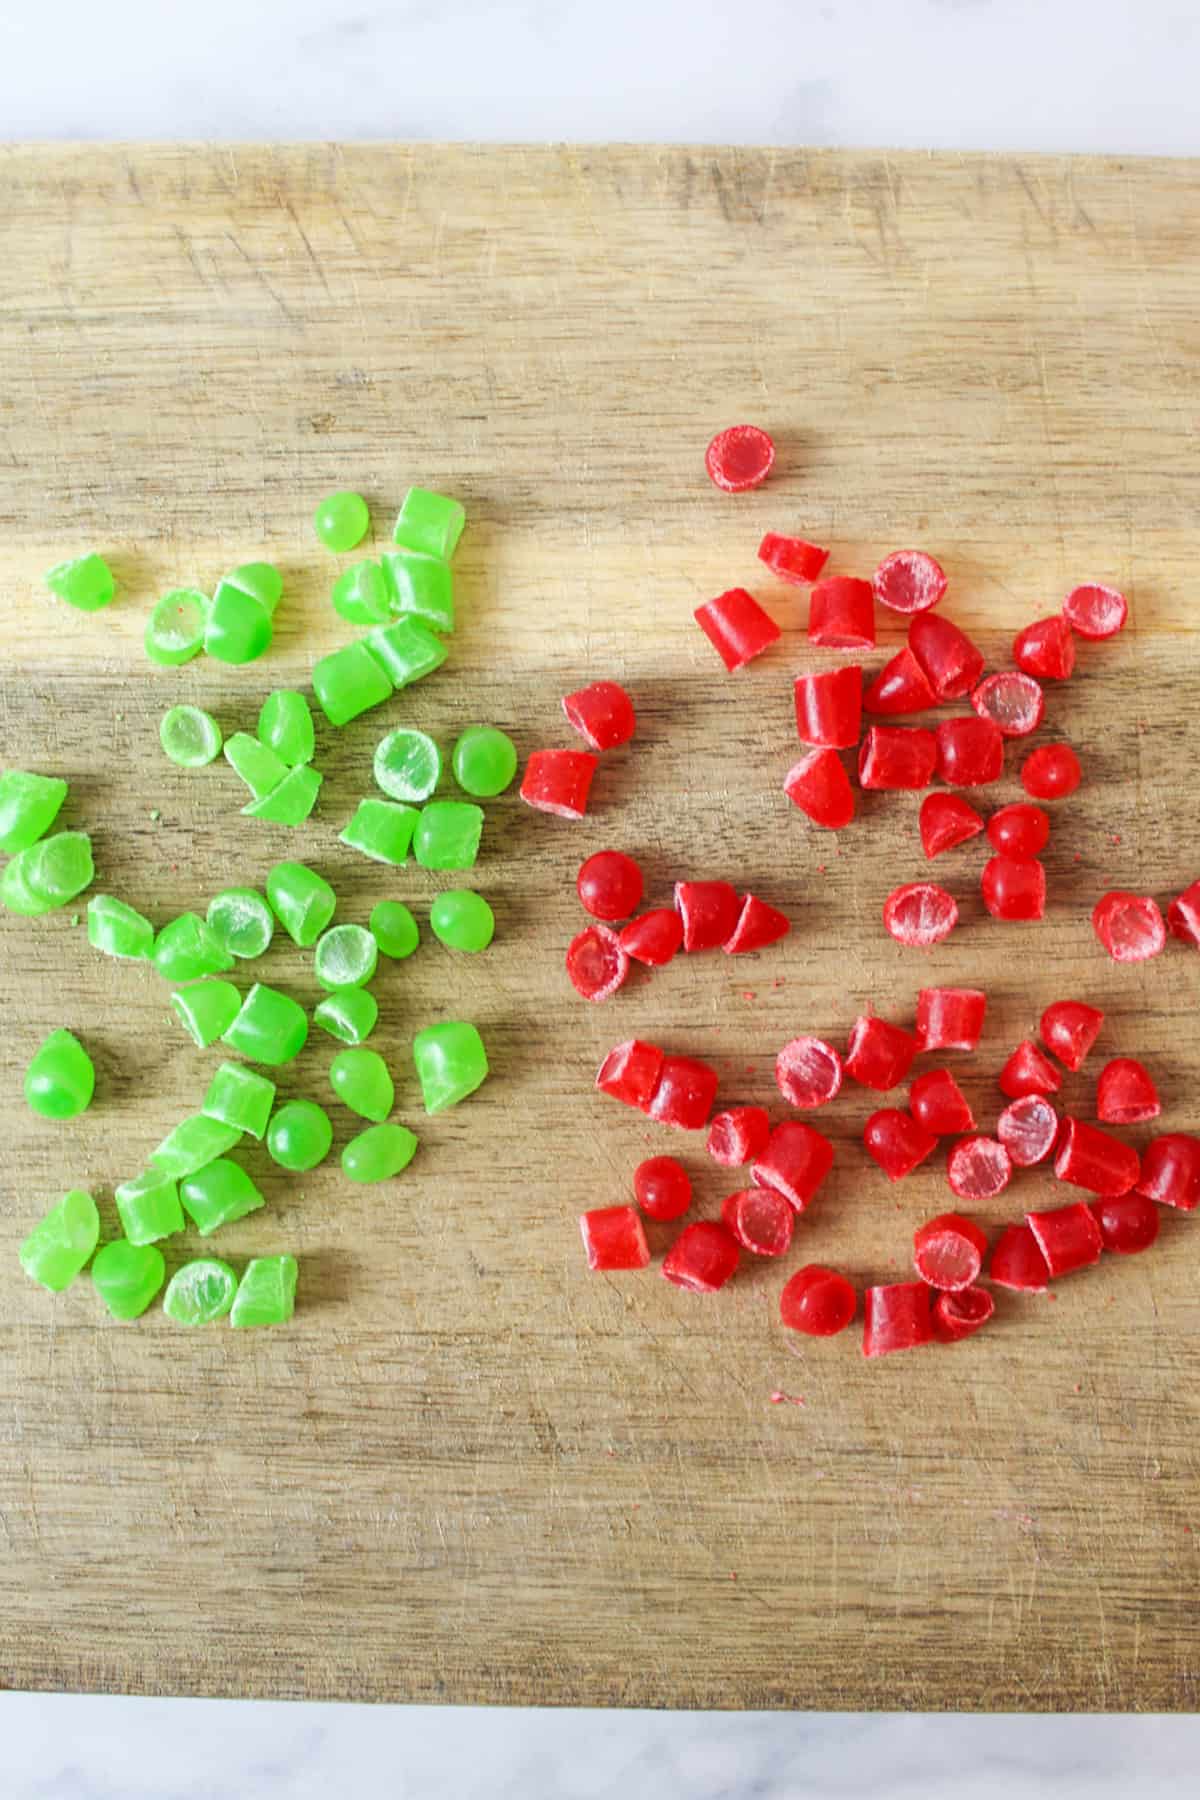 red and green mike and ike candies on a cutting board chopped into pieces